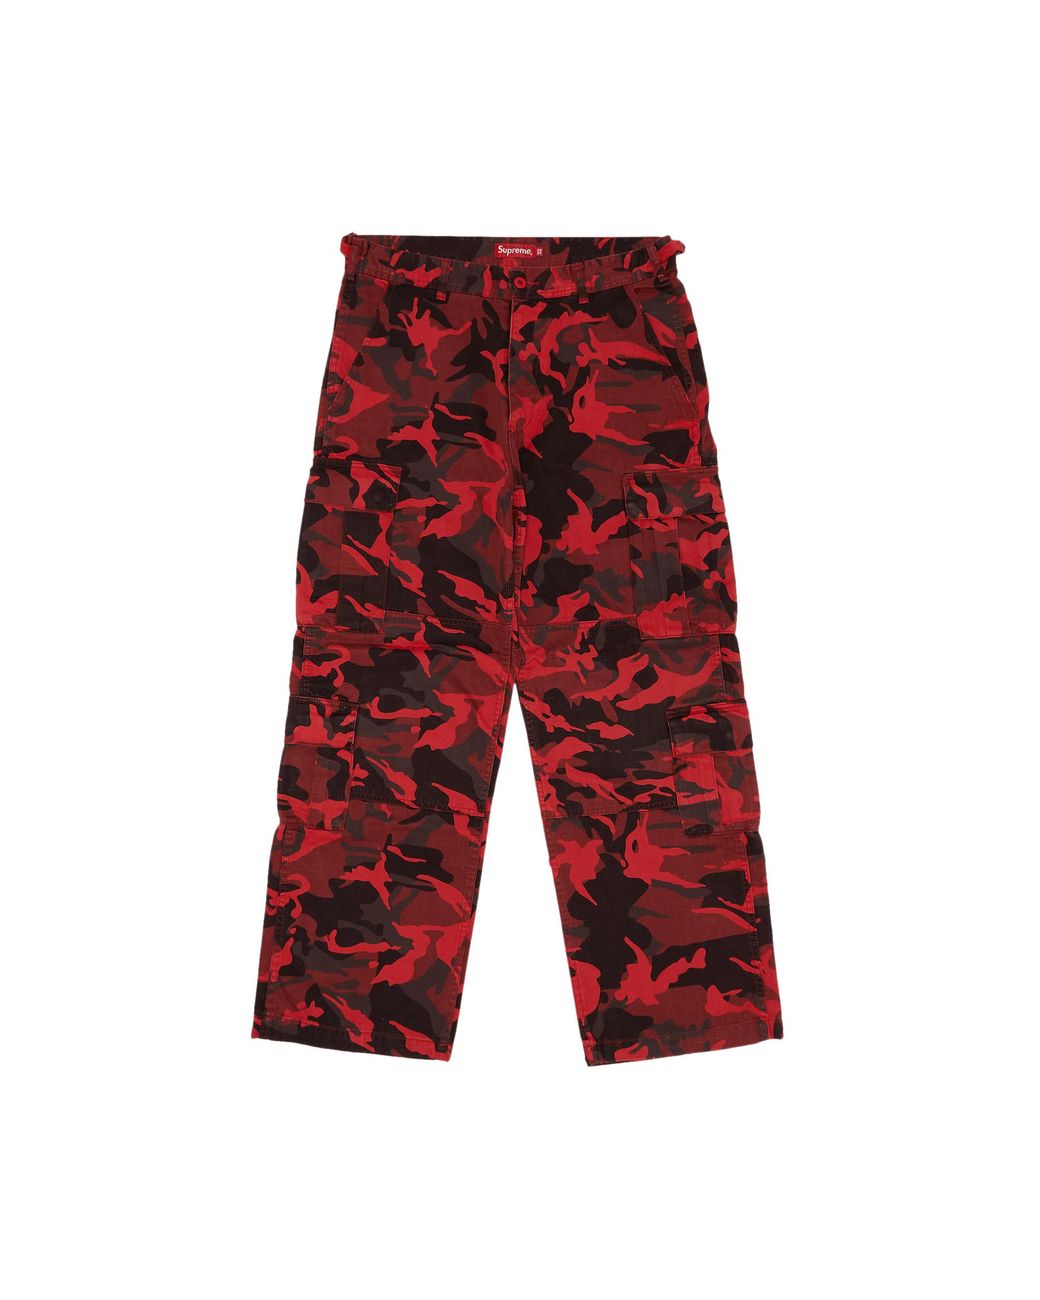 Discover more than 151 red combat trousers super hot